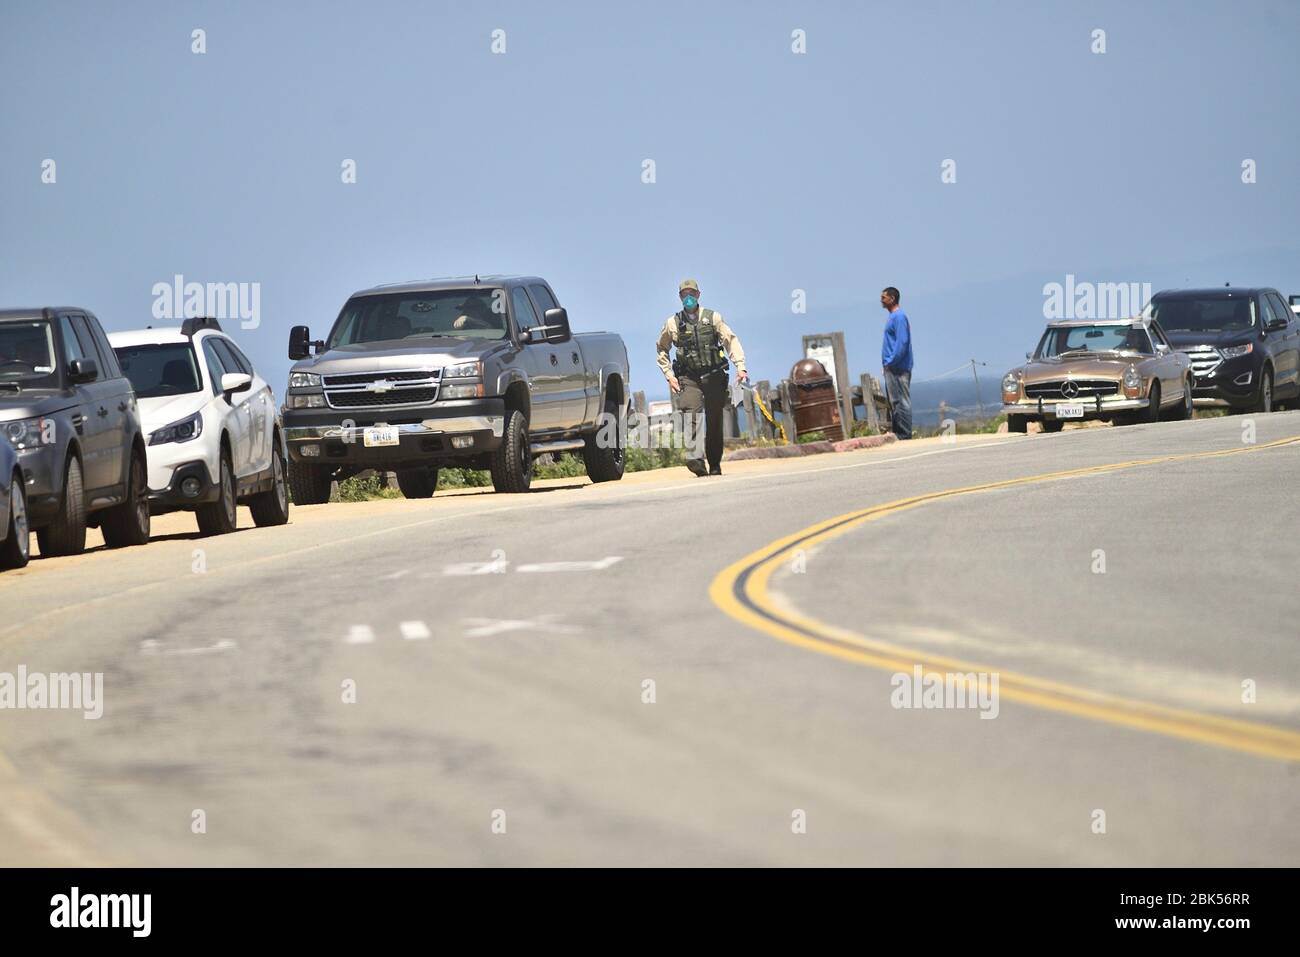 Pacific Grove, Kalifornien, USA. Mai 2020. California State Parks Peace Officer Posting Zeichen, um die zu klären.Recreation Rules for Asilomar State Beach during the COVID-19 Shelter in Place Order Credit: Rory Merry/ZUMA Wire/Alamy Live News Stockfoto